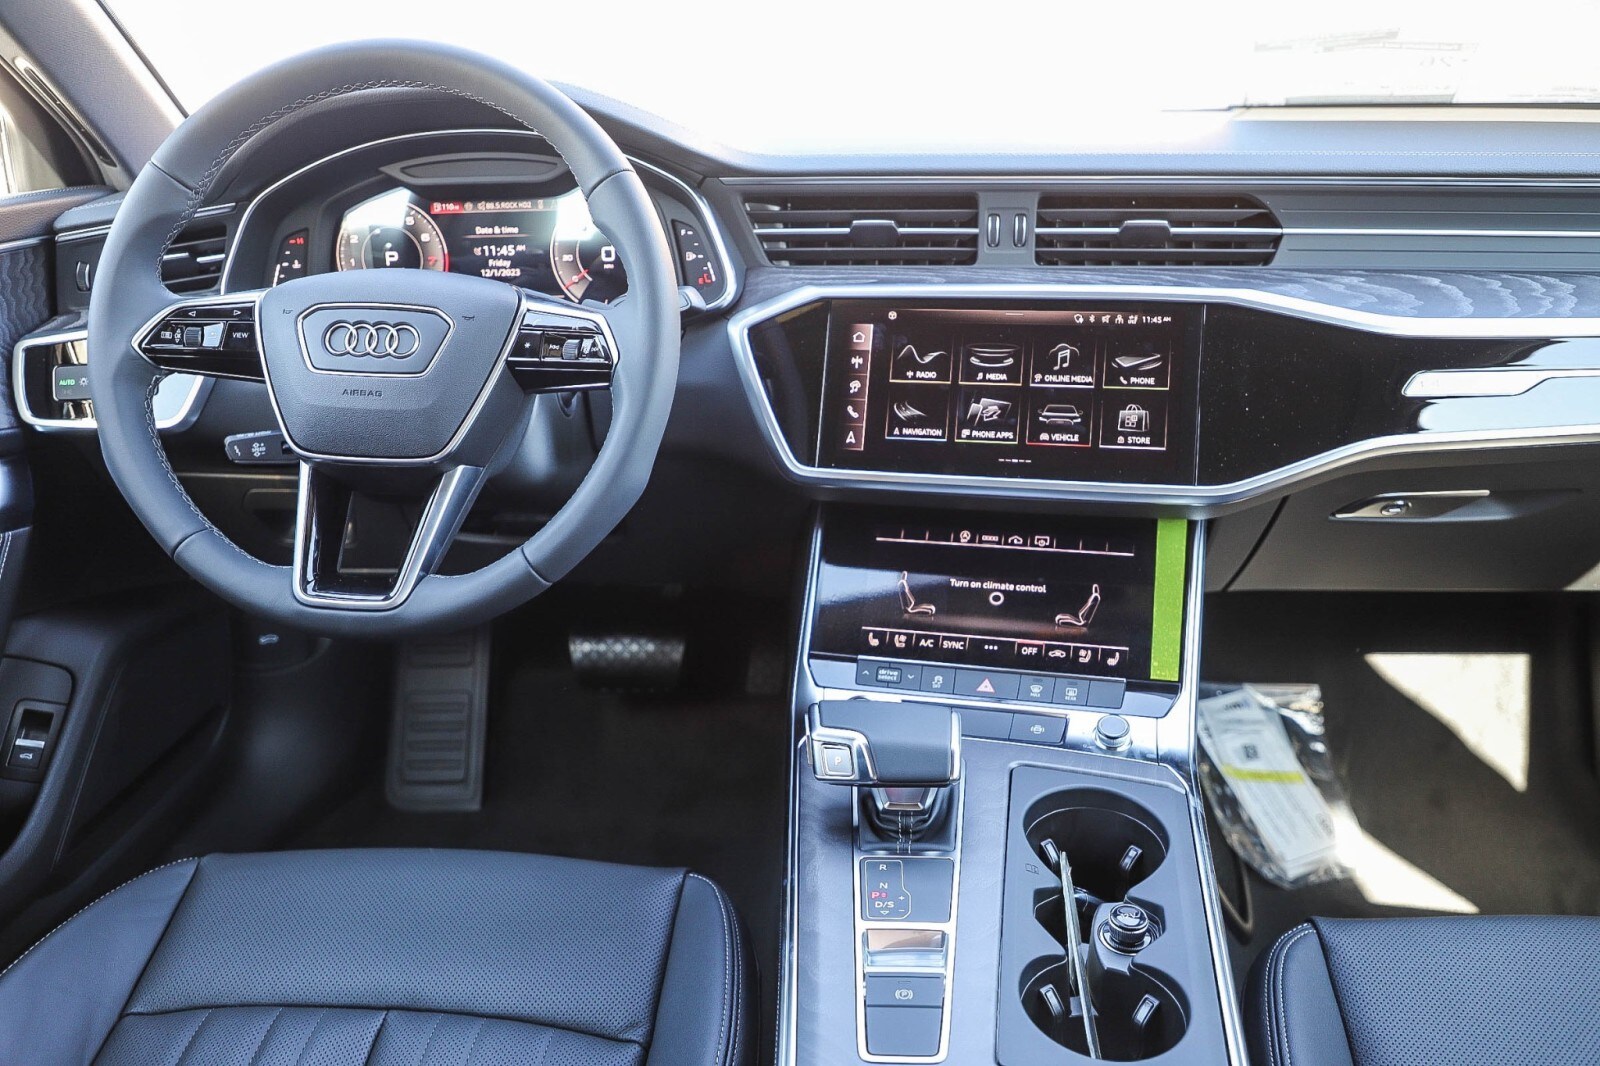 NEW 2024 Audi A6 Avant Facelift - Interior and Exterior Walkaround